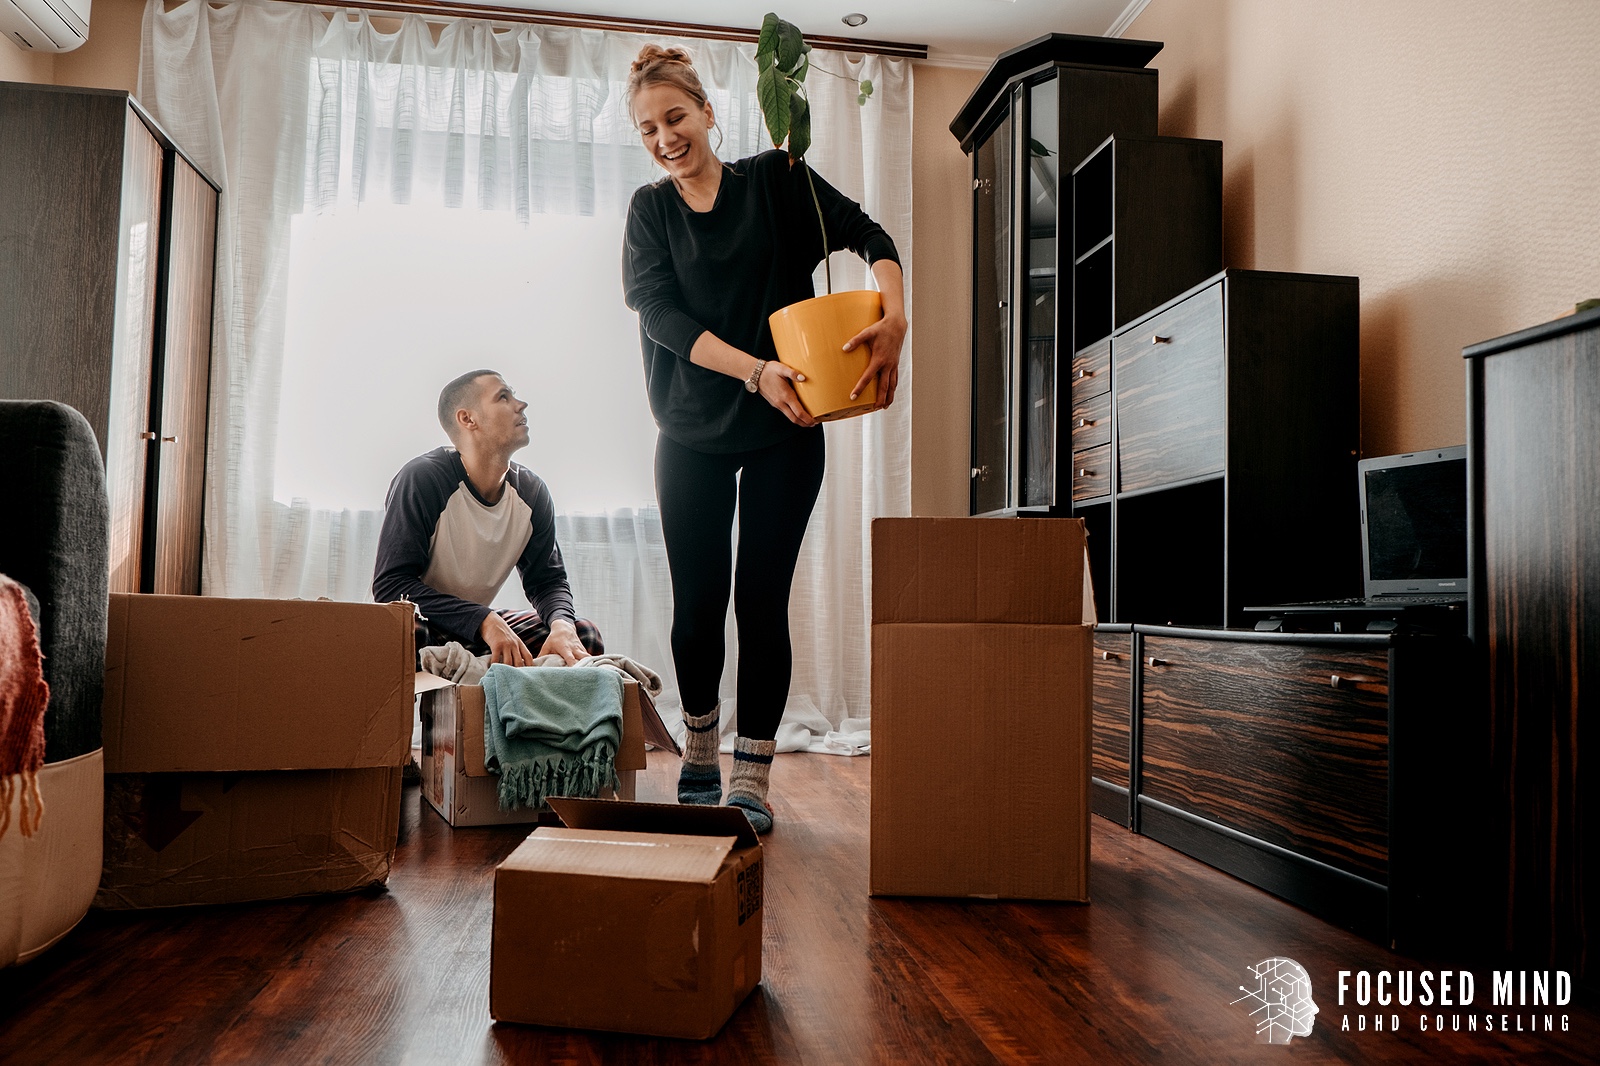 A woman holds a bucket while walking around moving boxes. Focused Mind ADHD Counseling can offer support for life transitions and ADHD and emotional regulation. Learn more by searching ADHD therapist for adults near me.